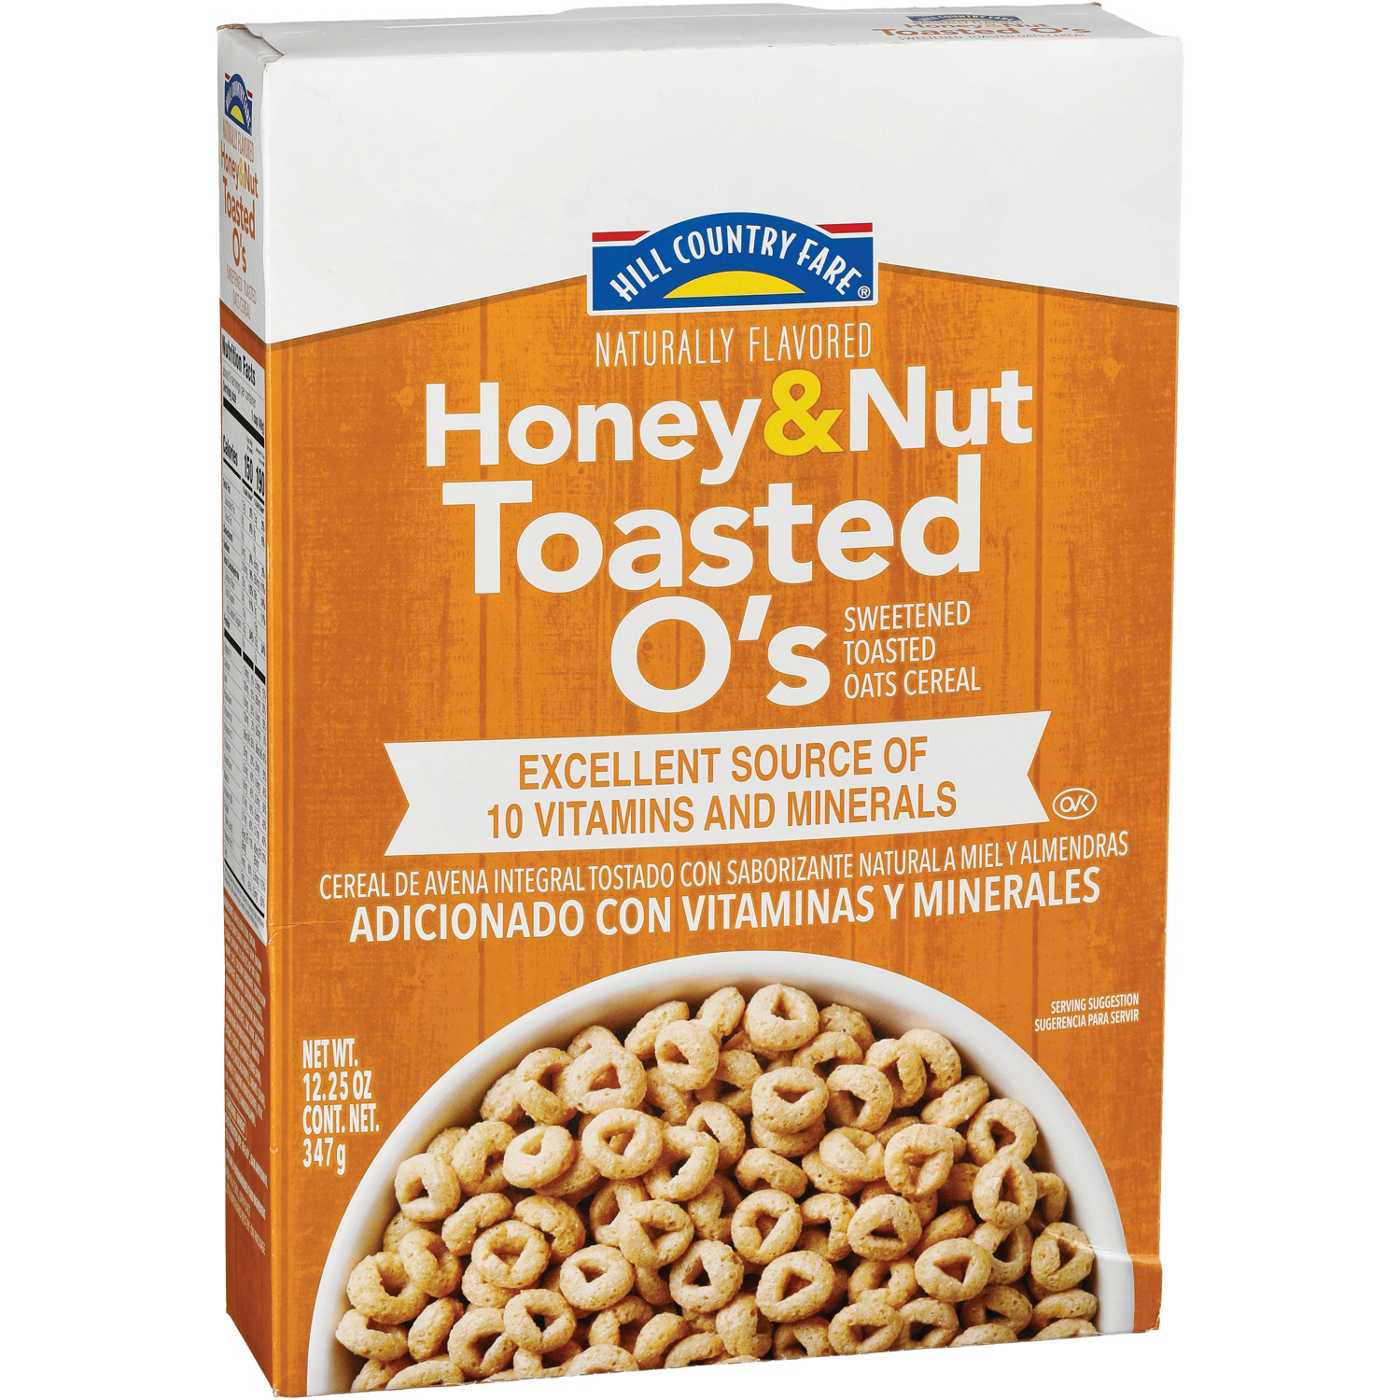 Hill Country Fare Honey & Nut Toasted O's Cereal; image 2 of 2